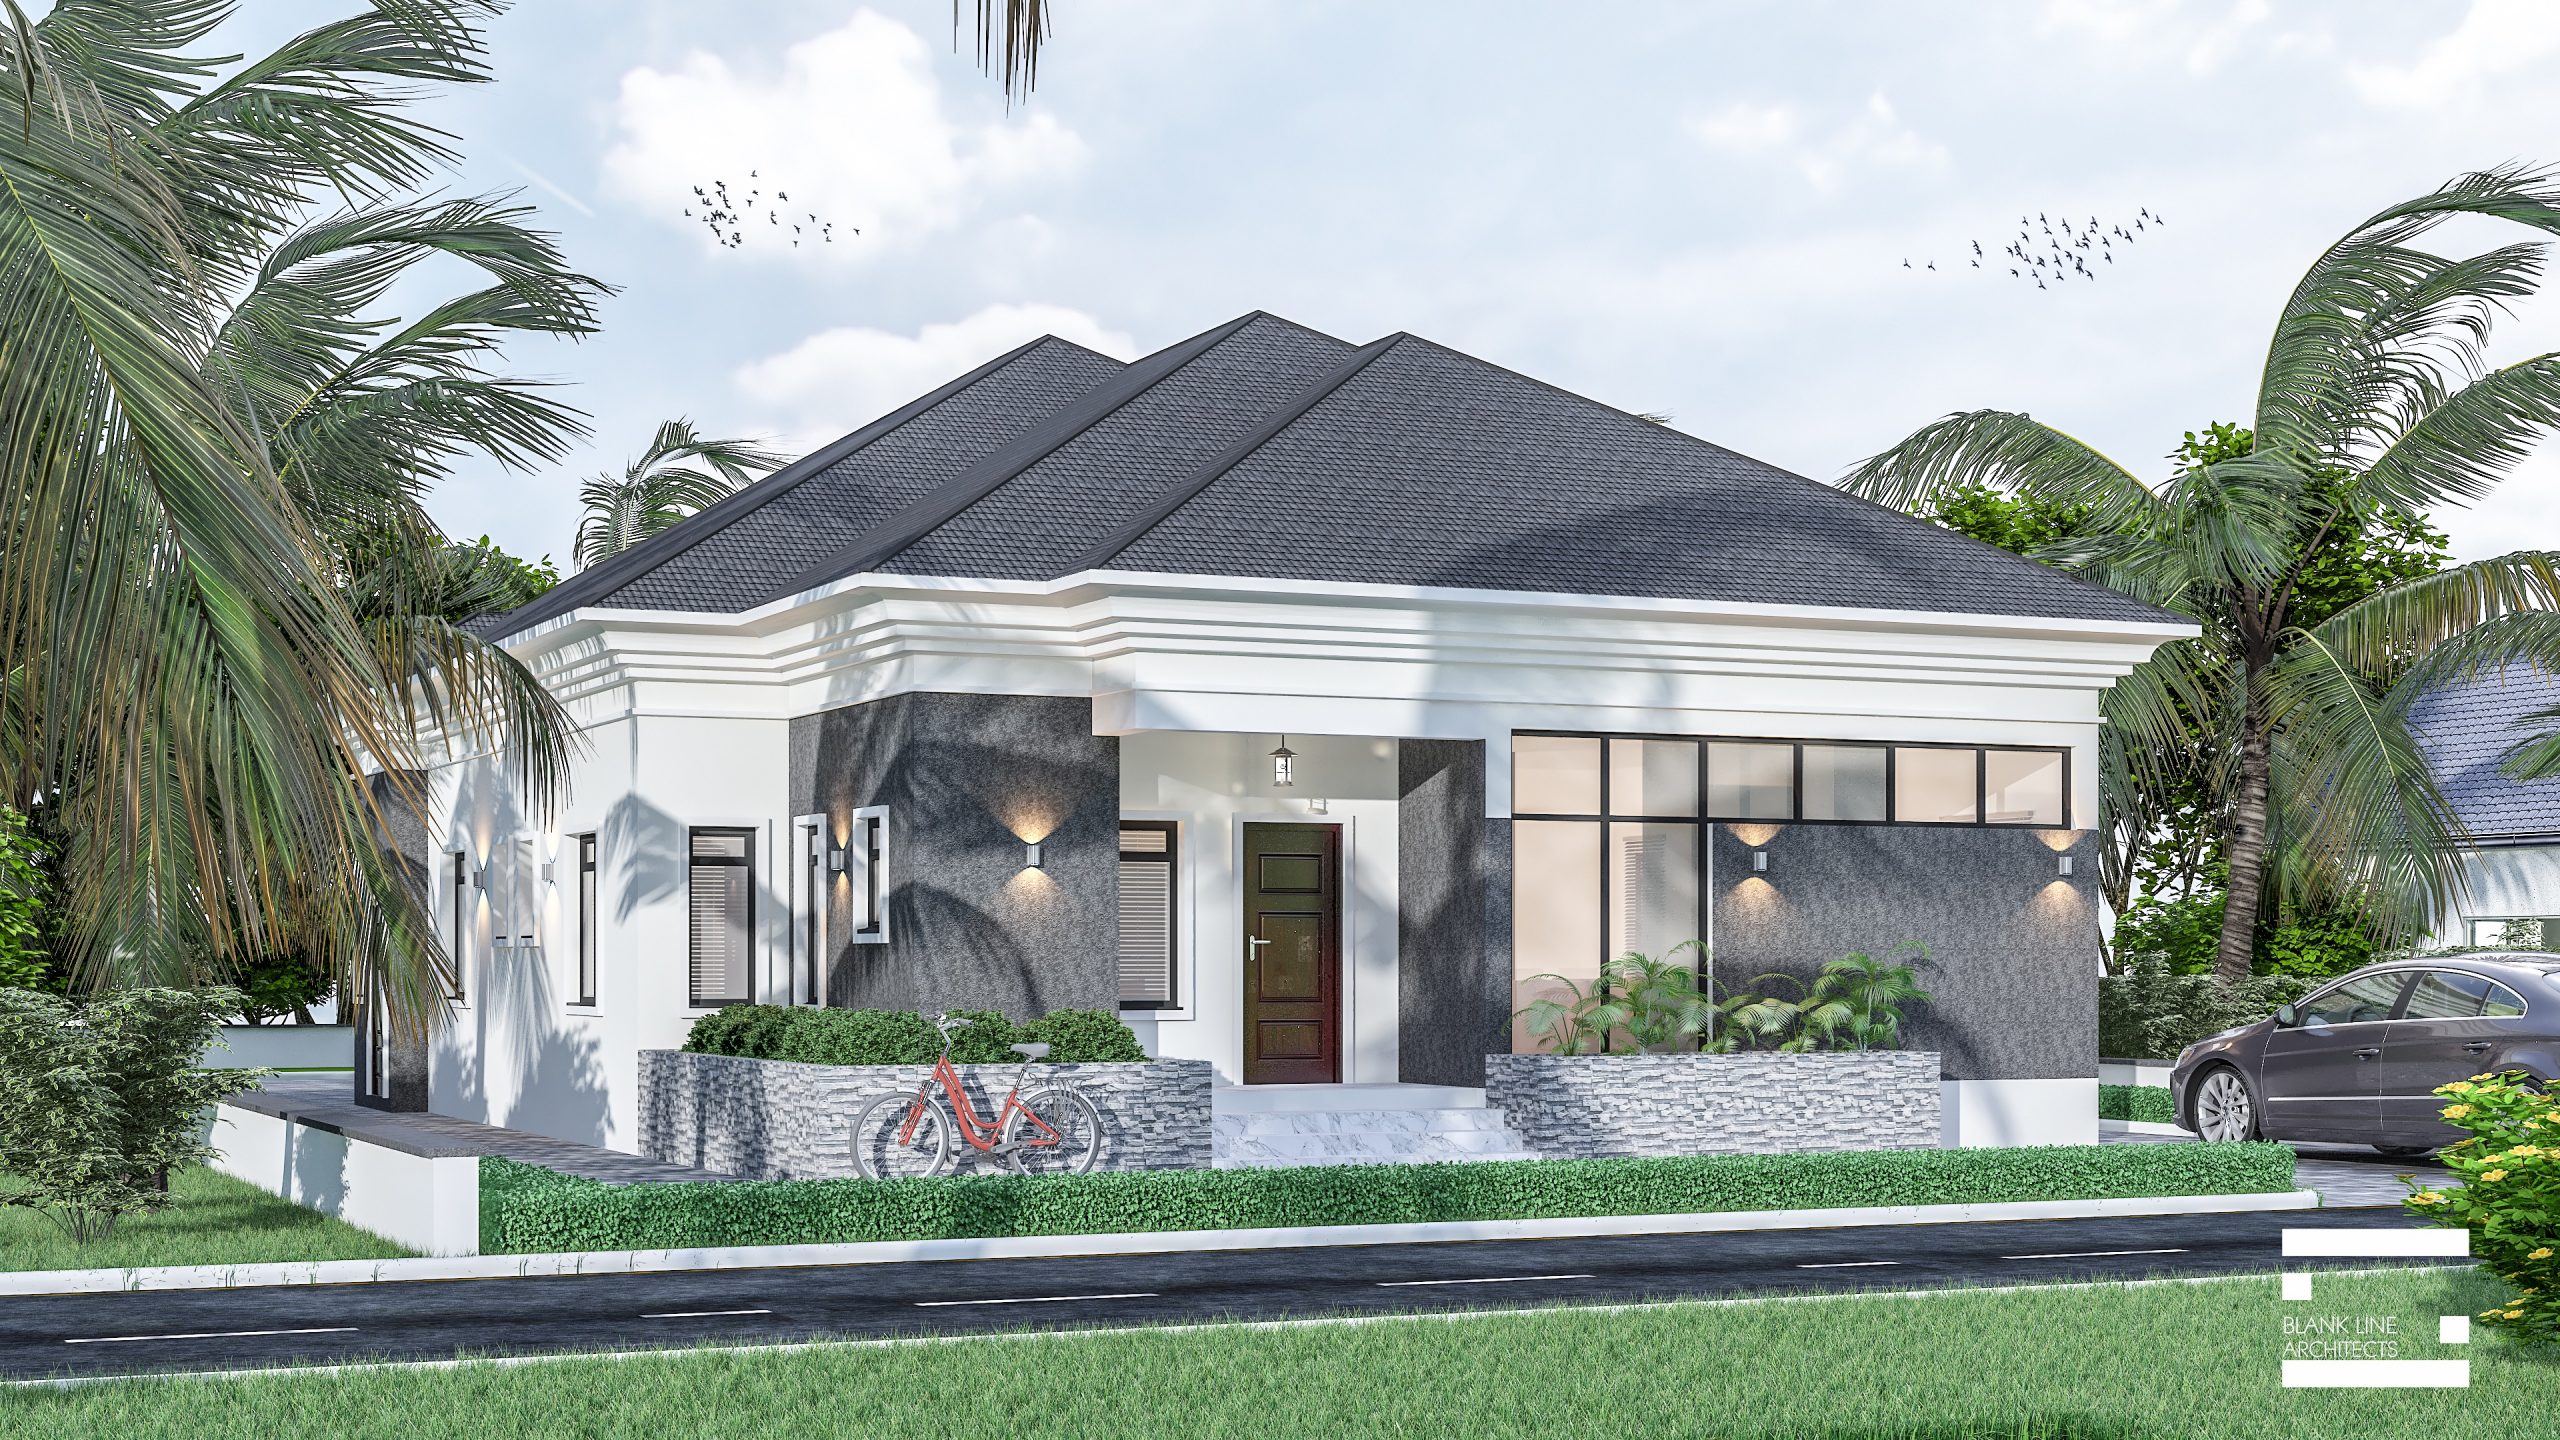 4 Bedroom Bungalow Projects Blank